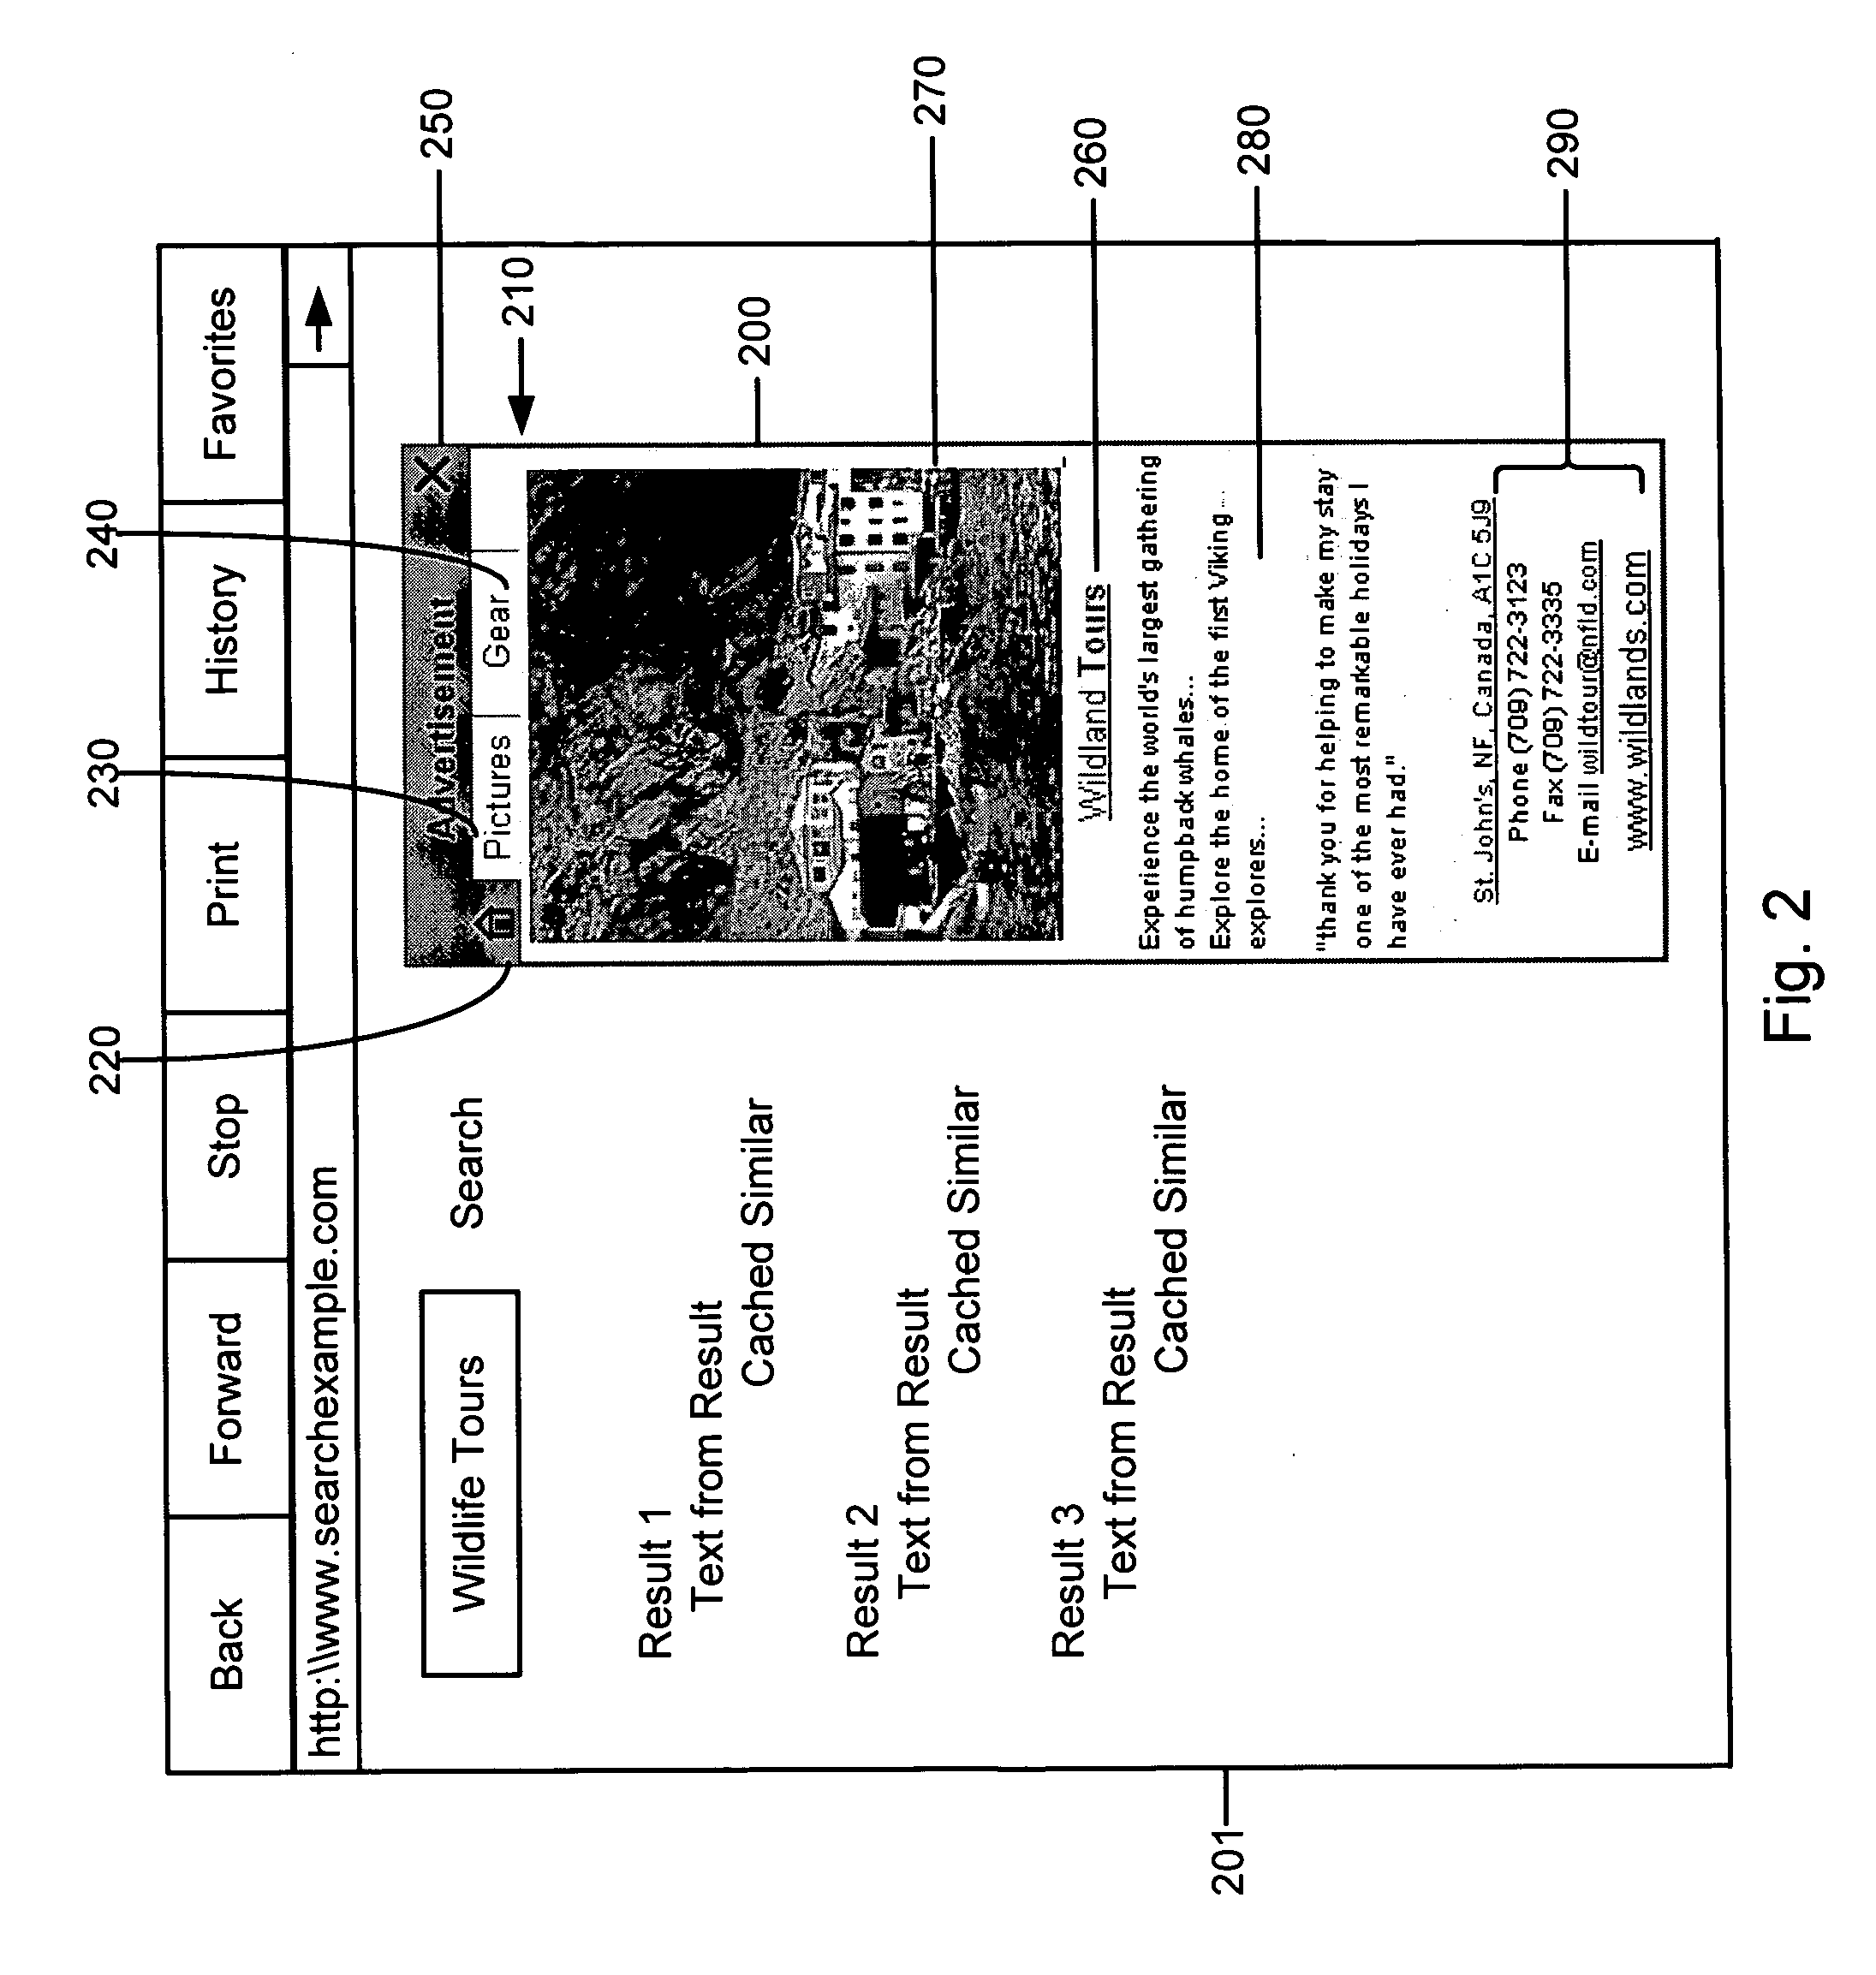 System and method for enabling an advertisement to follow the user to additional web pages